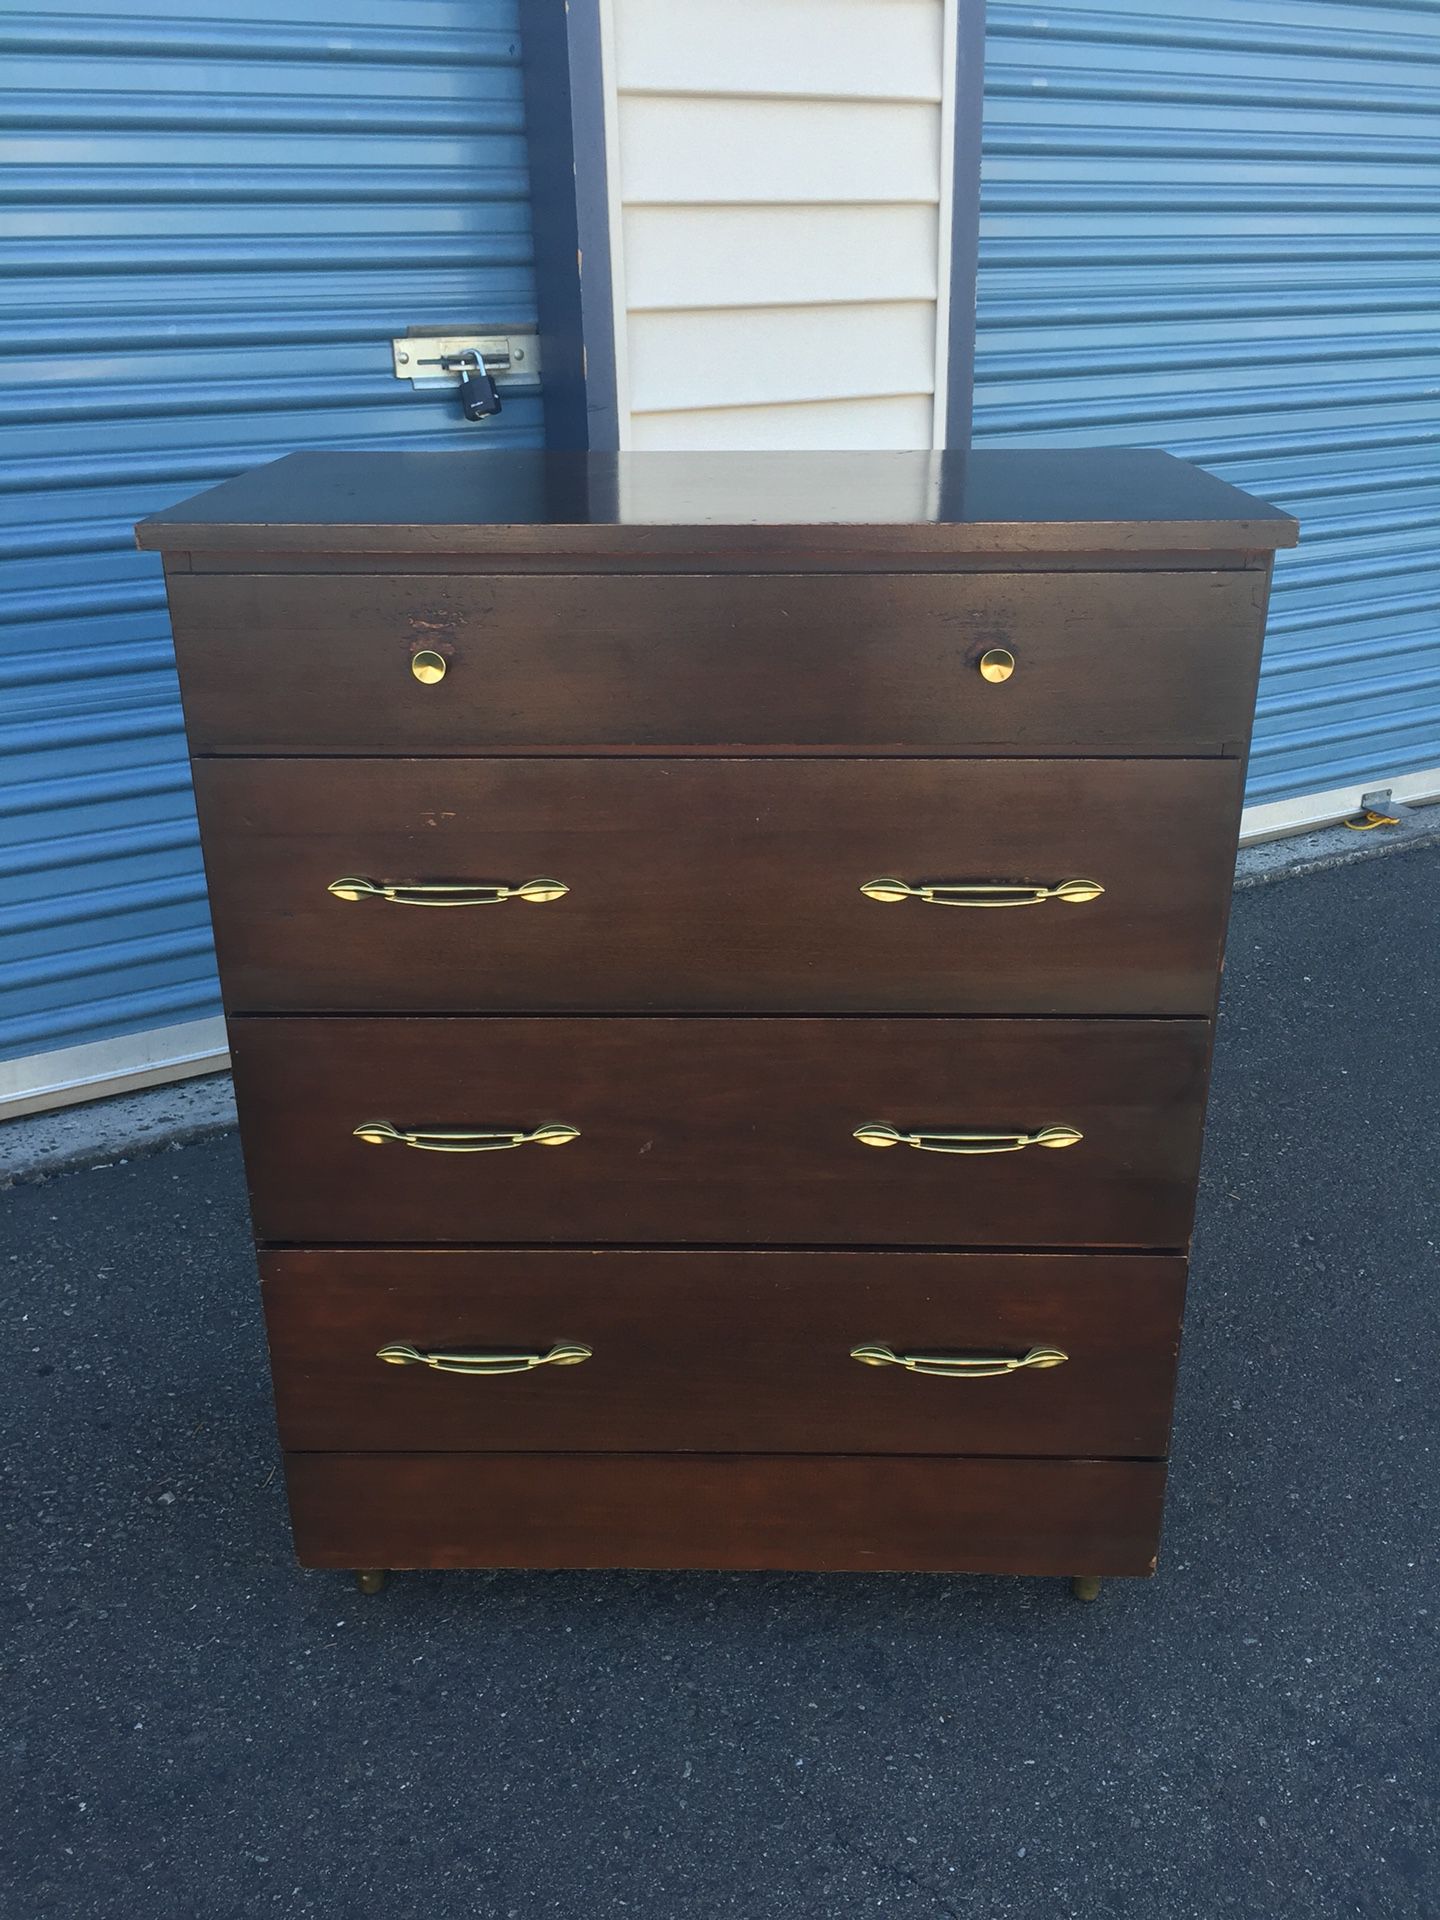 Mid Century Modern 4 Drawer Dresser w/ Brass Pulls& Feet. Delivery Available